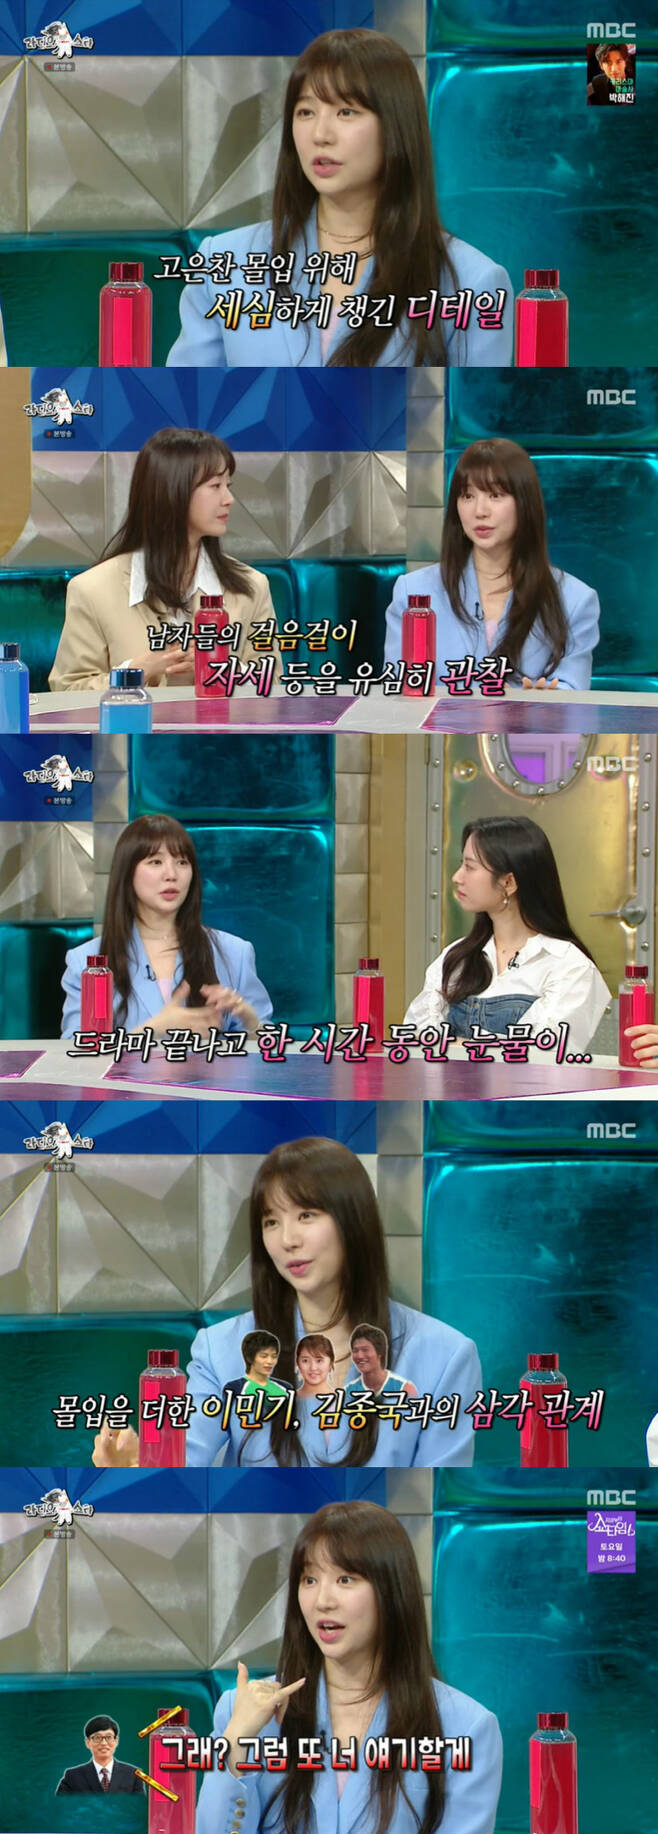 Radio Star Yoon Eun-hye has revealed his position on the ongoing love line with Kim Jong-kook.In MBC entertainment program Radio Star broadcasted on the 27th, Myeong Se-bin, Yoon Eun-hye, Bona, Heo Kyoung-hwan appeared as guests.Yoon Eun-hye has become a first love image in the 2000s with hits such as Palace, Coffee Prince 1st Store and Grapefield Man.Yoon Eun-hye praised the acting of Bona, a junior space girl who passed on the image of First Love with TVN Twenty Five Twinty One.Yoon Eun-hye said, I thought it was a big hit if it was my first work because I was so good, but it turned out that the foundation was solid.I dont cry that much in my drama. I mean, Im like myself. I made my debut.Even if I was criticized at that time, I remembered that I had overcome silently for my family. Yoon Eun-hye is an indispensable love line with Kim Jong-kook.Yoon Eun-hye and Kim Jong-kook formed a love line in SBS entertainment program X-Men 17 years ago.Kim Jong-kooks ear-blocking scene in the X-Men corner Of course game is still being talked about as a legend.Yoon Eun-hye said of the situation at the time, It became like a triangle with Lee Min Ki, and Lee Min Ki came out too seriously.I felt like I was really taking me away, he said. At that time, my brother blocked my ears and wanted to stop my ears.I wanted to be a genius, he recalled.Yoo Jae-Suk still mentions Yoon Eun-hye in Running Man.Yoon Eun-hye has never appeared on the air, but there is a 40-minute collection of Yoon Eun-hye on YouTube.Yoon Eun-hye said: My brother Park Jae-seok sometimes talks about me on Running Man: What do you do when you play?I also talked about me, he said. So I called Park Jae-seok, my first words were Im sorry. I said it was okay, so Ill talk to you again next time. Heo Kyoung-hwan, a comedian and successful CEO, said, In the preliminary interview, the artist came when he was 15 billion won (sales) and 35 billion won?I wanted to clean up the assets in this case, he said. I do not include VAT and I am making about 60 billion won in sales. There was another reason Heo Kyoung-hwan appeared on Radio Star.Heo Kyoung-hwan said, Every time Radio Star comes, sales rise by 200%. Recently, it merged with the largest milk kit company in Korea.Now that the scale is so large, I will leave it to a professional manager and I will concentrate on broadcasting. Kim Ji-min, a gagsum colleague of Heo Kyoung-hwan, recently unveiled his devotion to Kim Jun-ho.Heo Kyoung-hwan said, I was surprised enough to drop my cell phone. Kim Ji-min and I were joking that if we can not marry until we are 50 years old, we will do it alone.One day, I was looking at my cell phone at home, and it was called a scoop. I dropped my cell phone.Kim Ji-min has become a sister-in-law to Heo Kyoung-hwan. Heo Kyoung-hwan said, I met Junho recently and he said that he was a jimin.Junhos brother is getting better. I can not smell it now. Heo Kyoung-hwan said, I talked about fifty as a joke, but I can not wait eight years.I hope you have a good result, said Kim Ji-min.Heo Kyoung-hwan also recalled a harsh military discipline during his rookie days, saying, I never knew it because I had never been in a group life.I crossed my legs while I was meeting, and the Sunbathers were in a hurry. I gathered all my juniors and made a soul. I wanted to live a comedian, but the savior appeared.It was Kim Won-hyo, he said.Heo Kyoung-hwan said, Kim Won-hyo is famous for not having a concept, but he is good. He chewed gum at a meeting.We would have spit out sorry, but (Kim Won-hyo) took out the gum and handed it to the Sunbathers. 